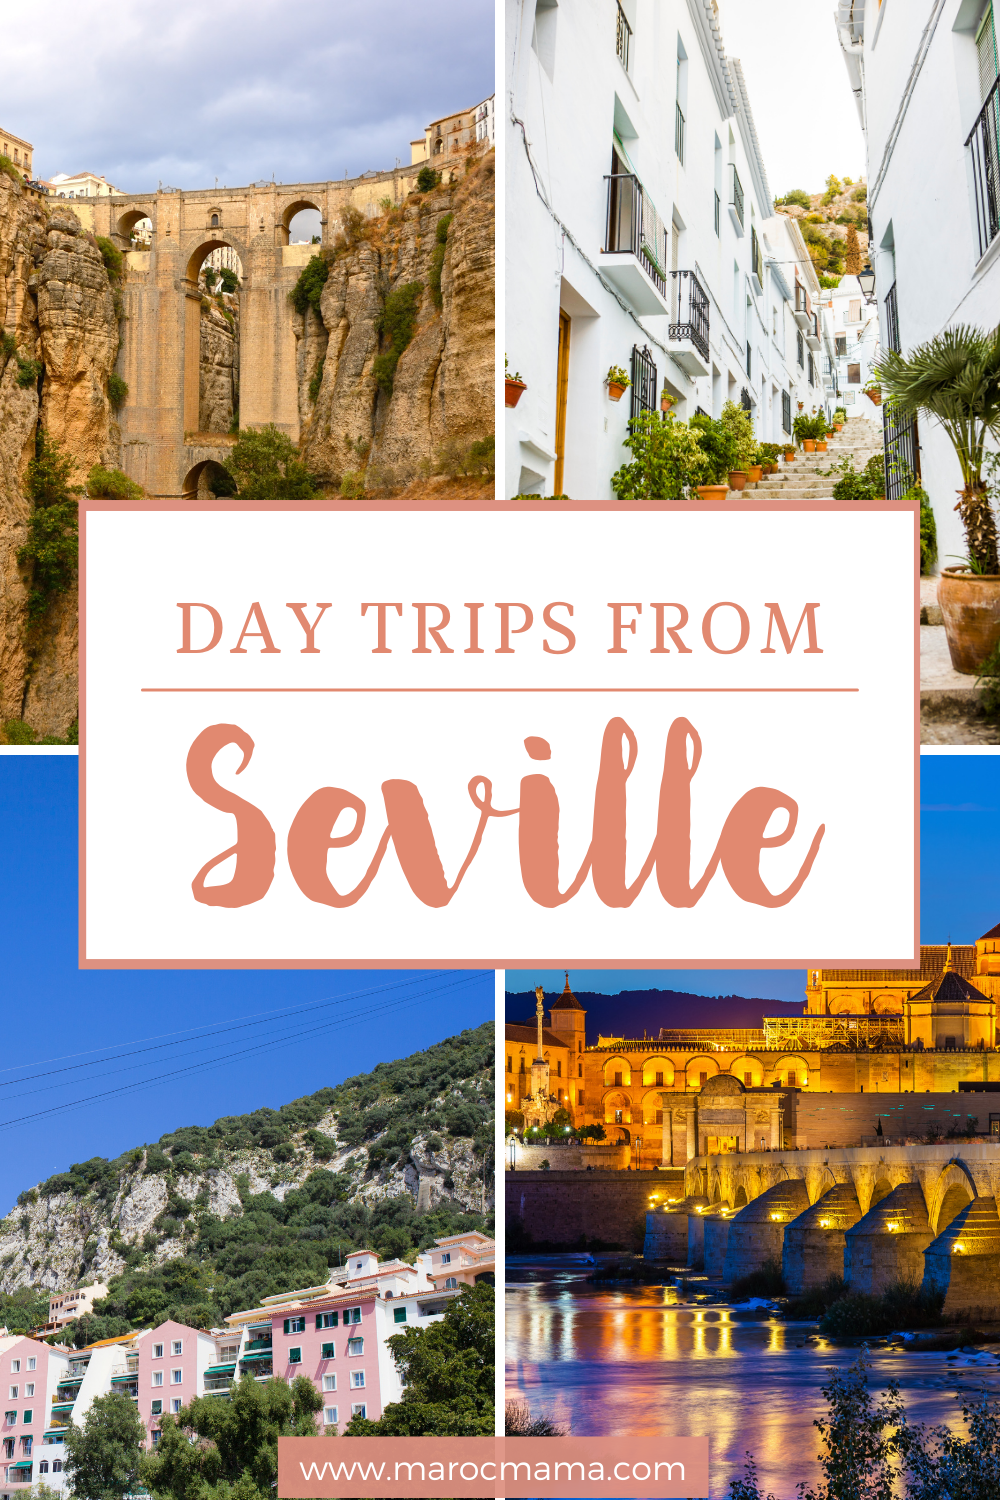 different places you can visit during your day trips from Seville